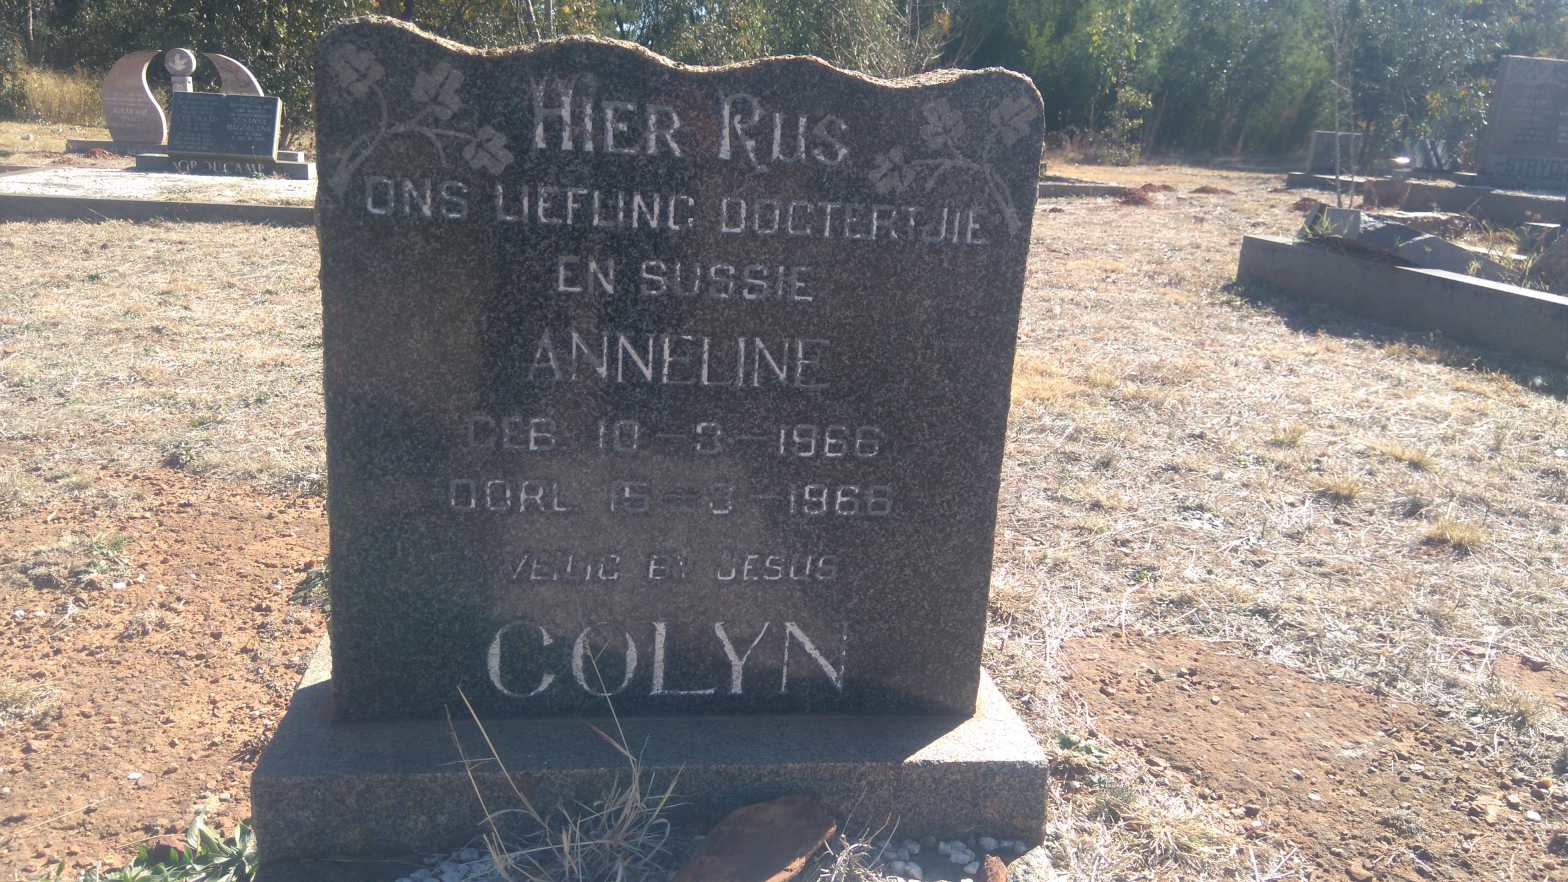 COLYN Anneline 1966-1966